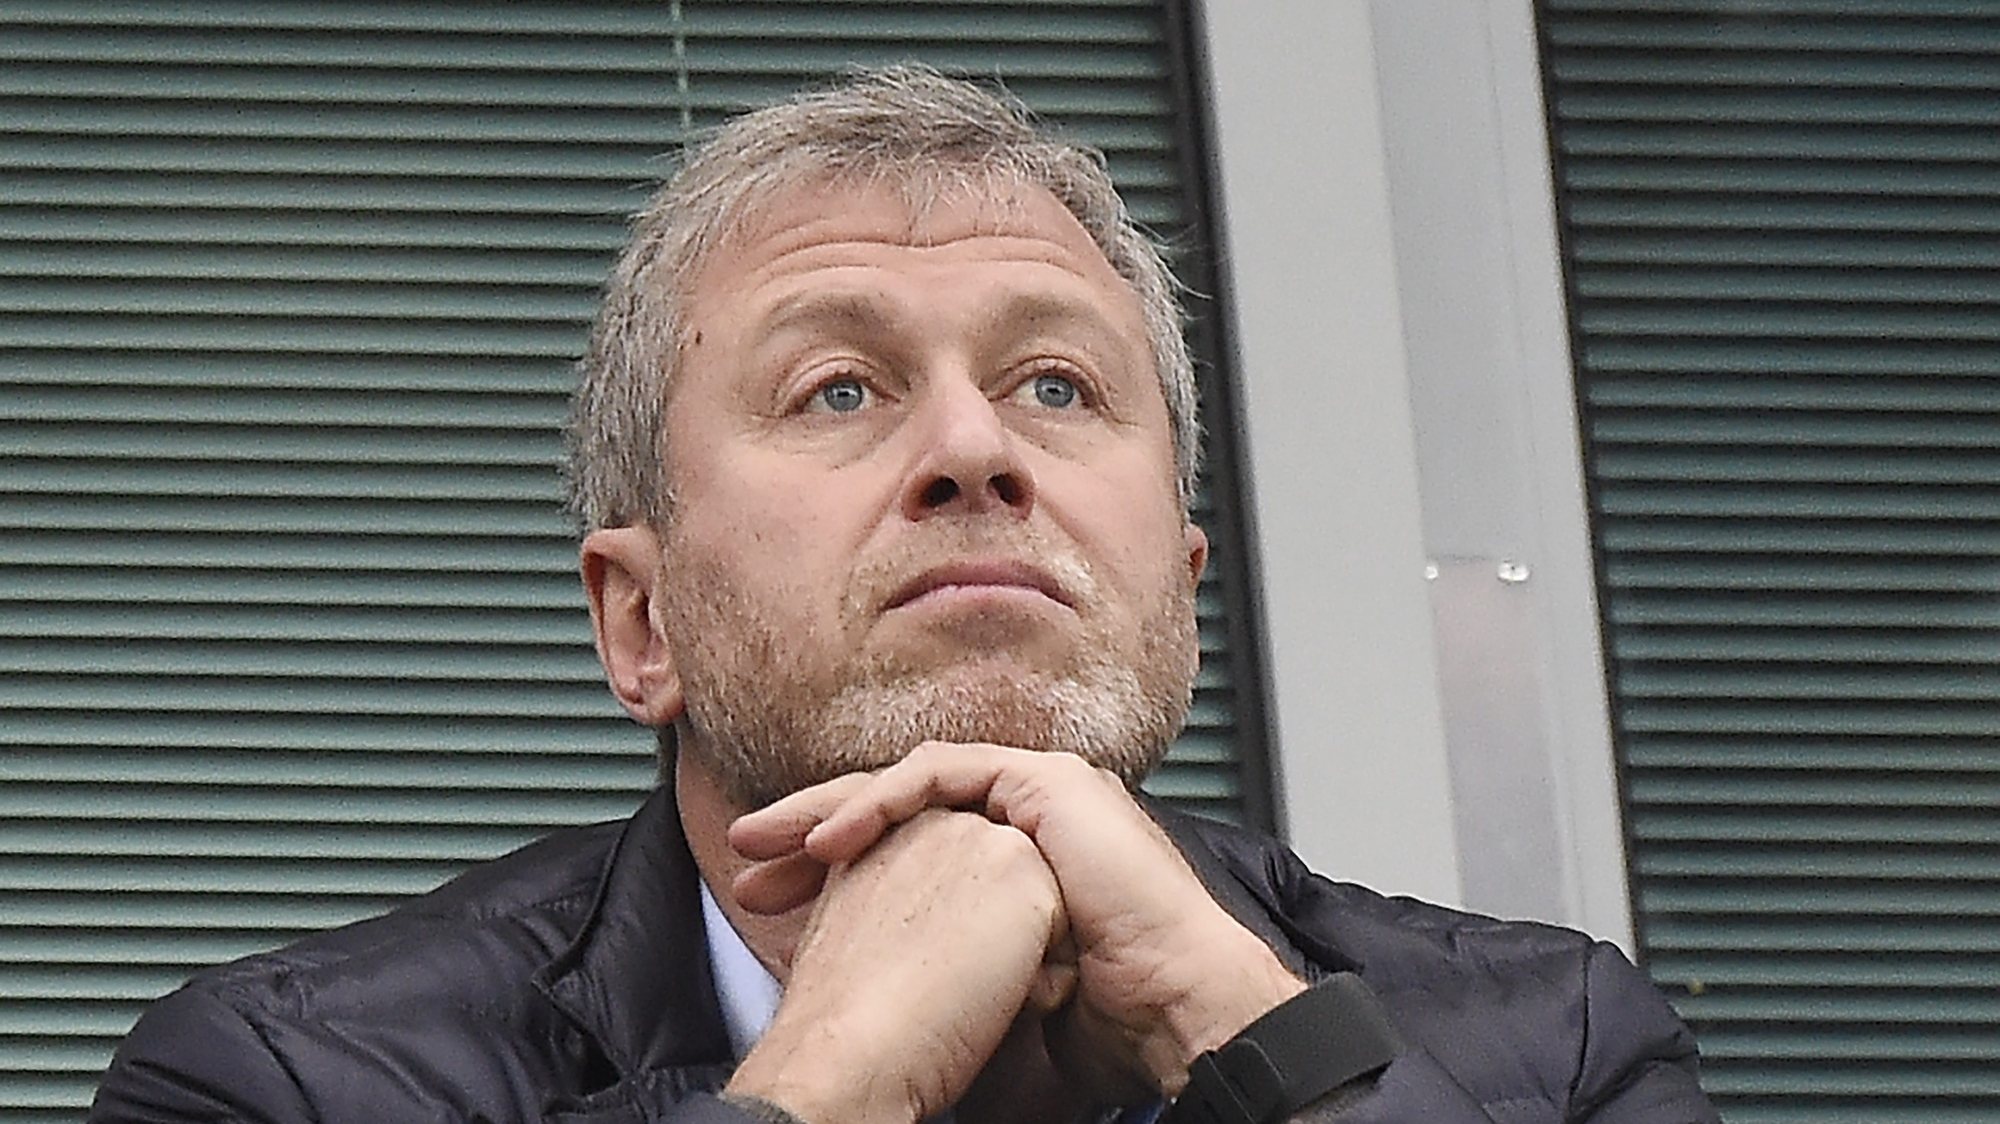 epa05075419 Chelsea owner Roman Abramovich watches the game from the stands against Sunderland during the English Premier League soccer match between Chelsea and Sunderland at Stamford Bridge in London, Britain, 19 December 2015.  EPA/FACUNDO ARRIZABALAGA EDITORIAL USE ONLY. No use with unauthorized audio, video, data, fixture lists, club/league logos or &#039;live&#039; services. Online in-match use limited to 75 images, no video emulation. No use in betting, games or single club/league/player publications